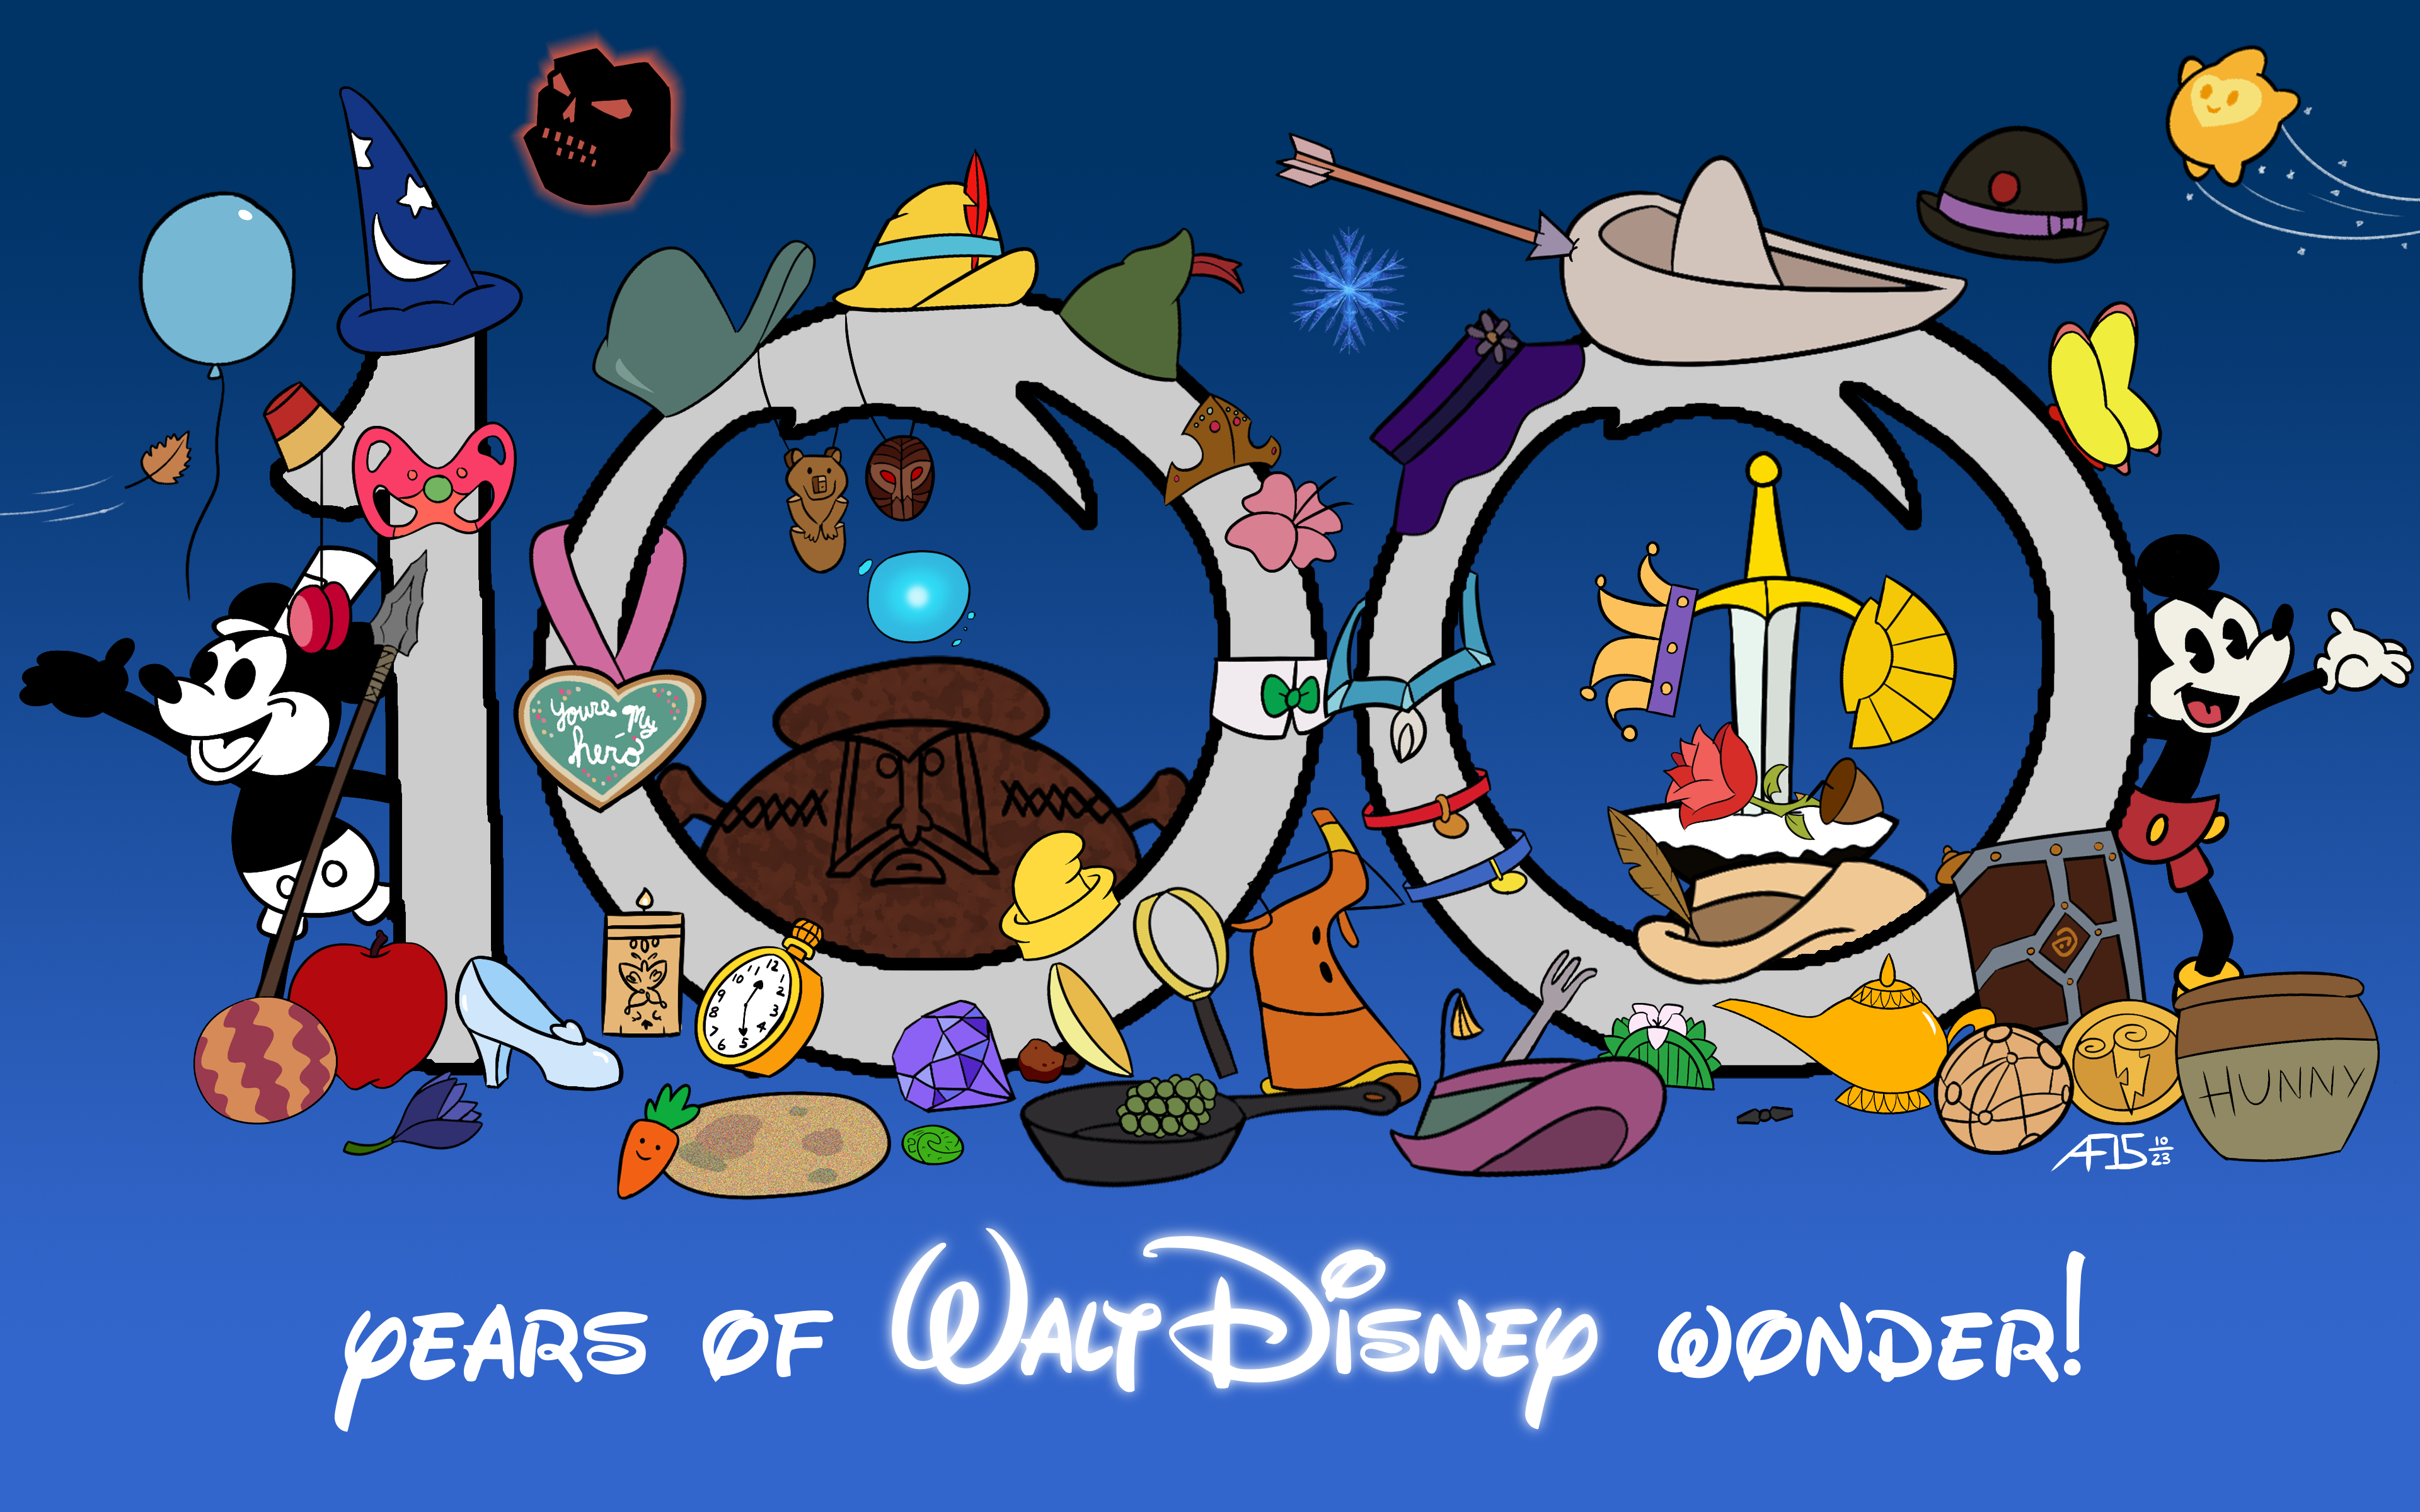 Happy 100 Years Disney (2023) by Camelo2017 on DeviantArt